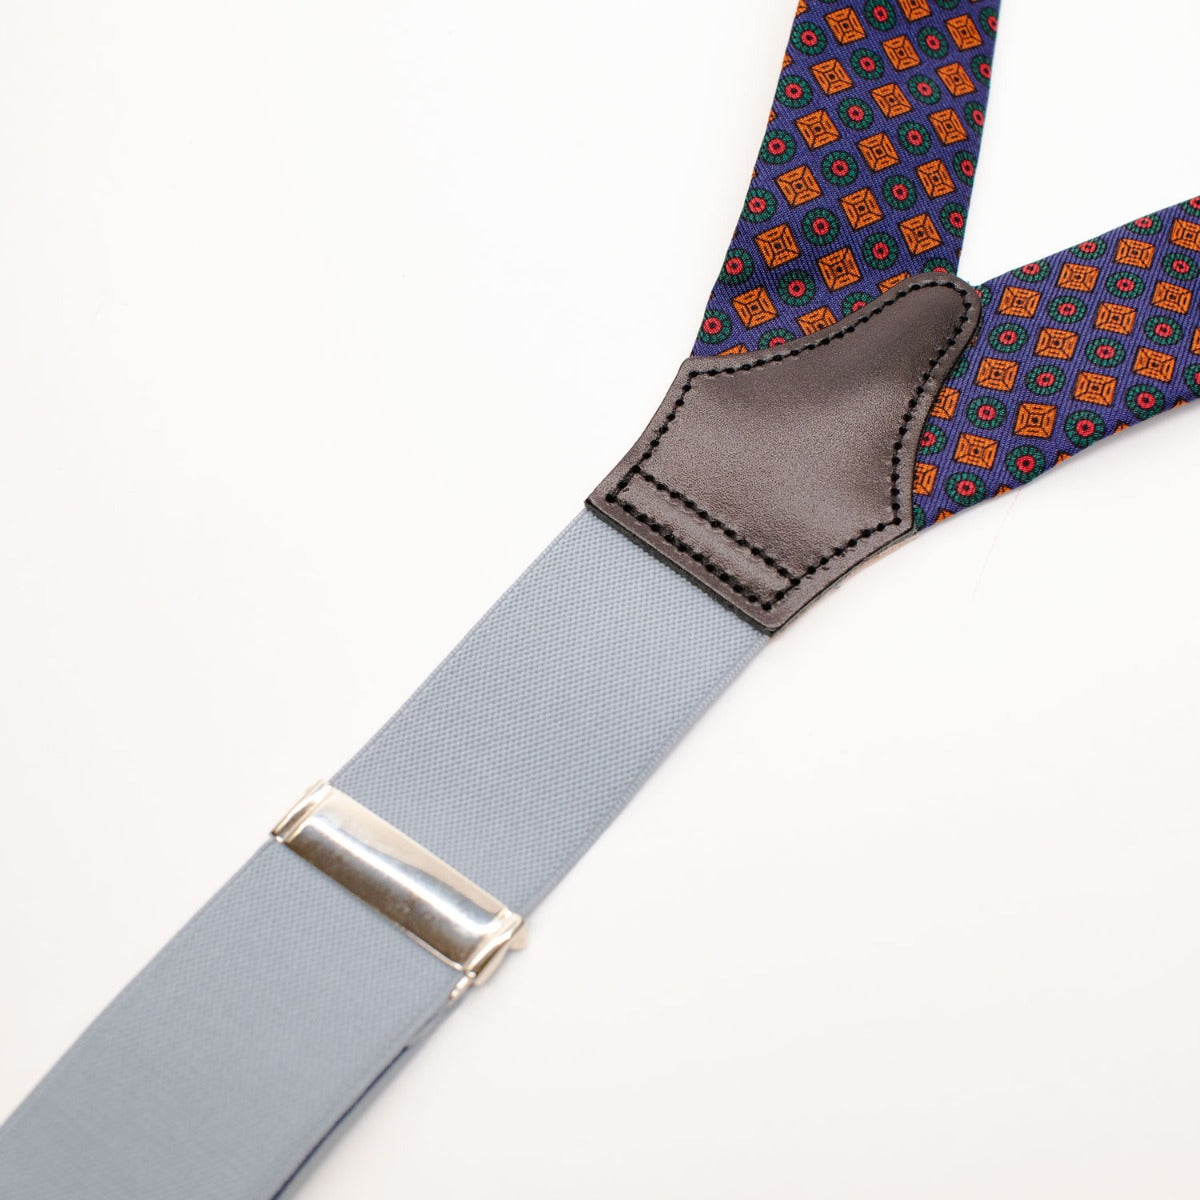 A pair of Sovereign Grade Plain Navy Braces with a blue and orange pattern made from 100% nylon by KirbyAllison.com.